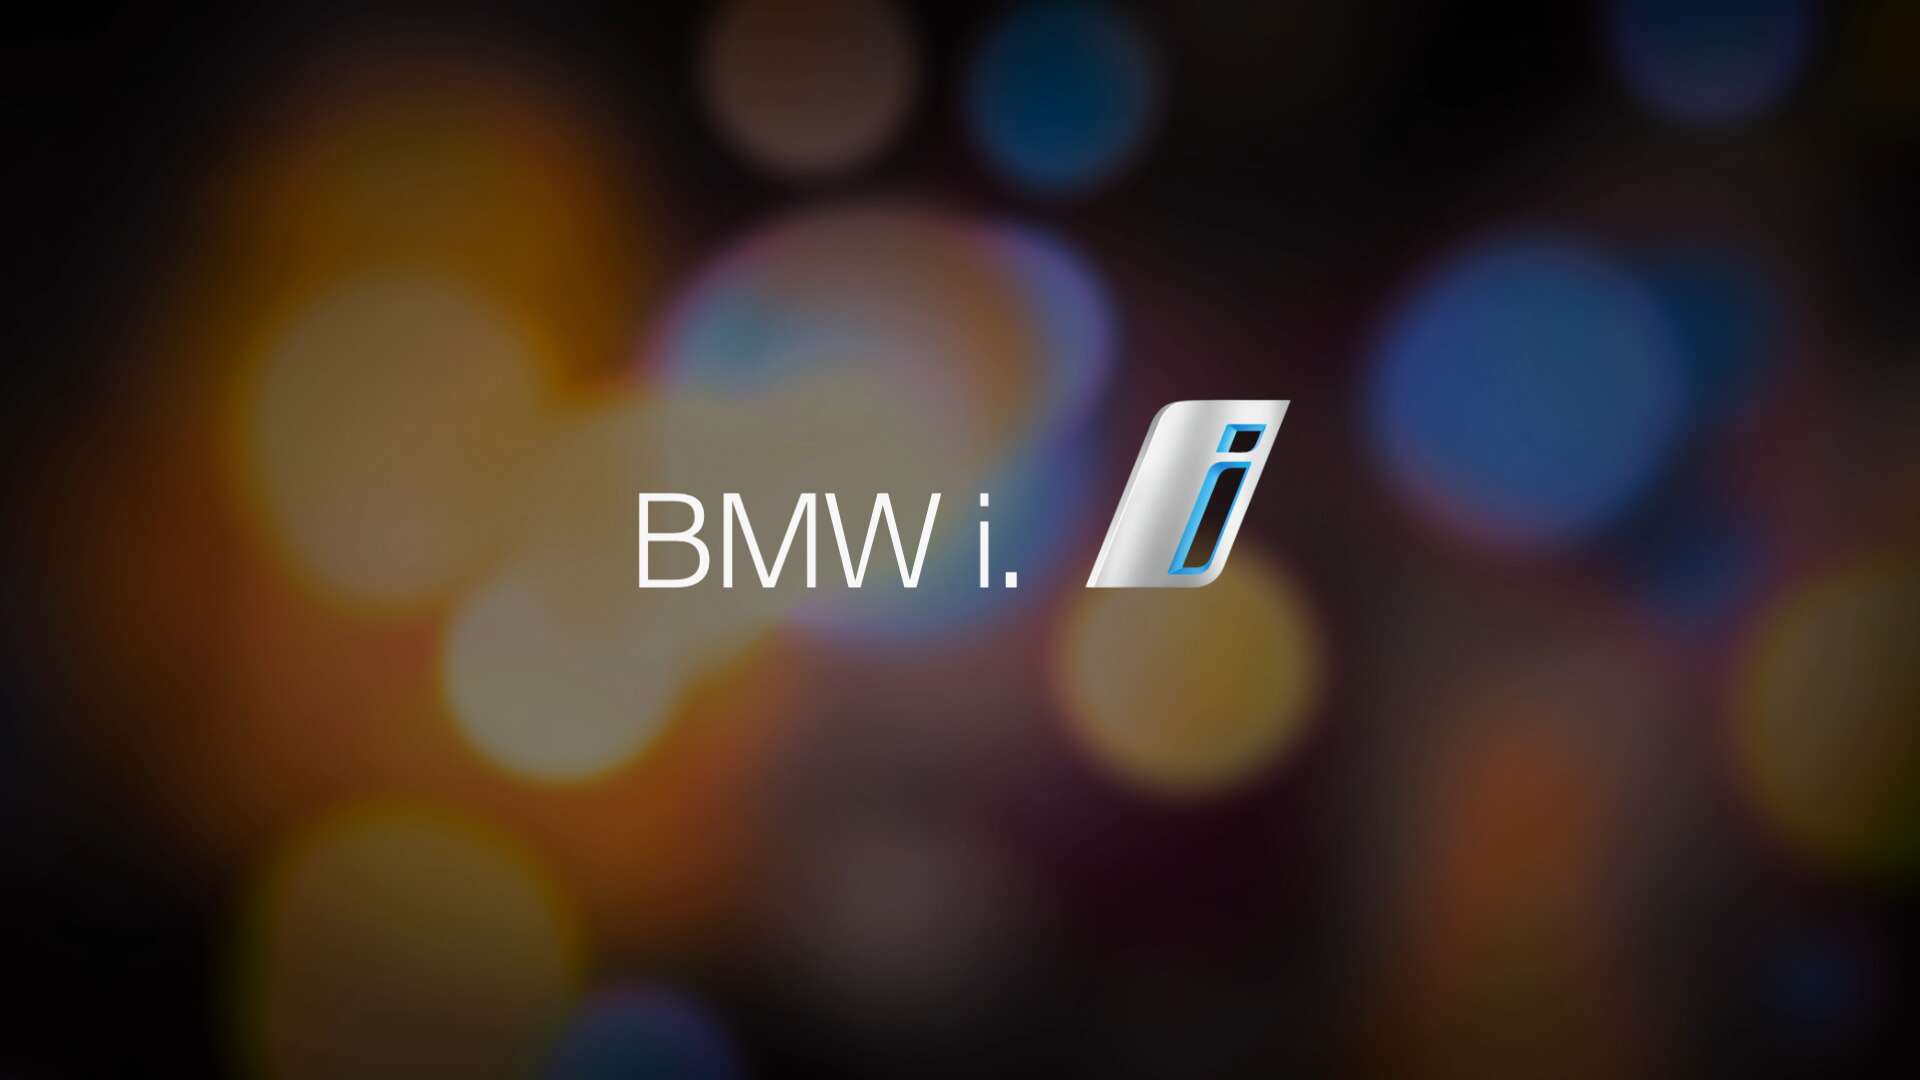 BMWi Mobility Services